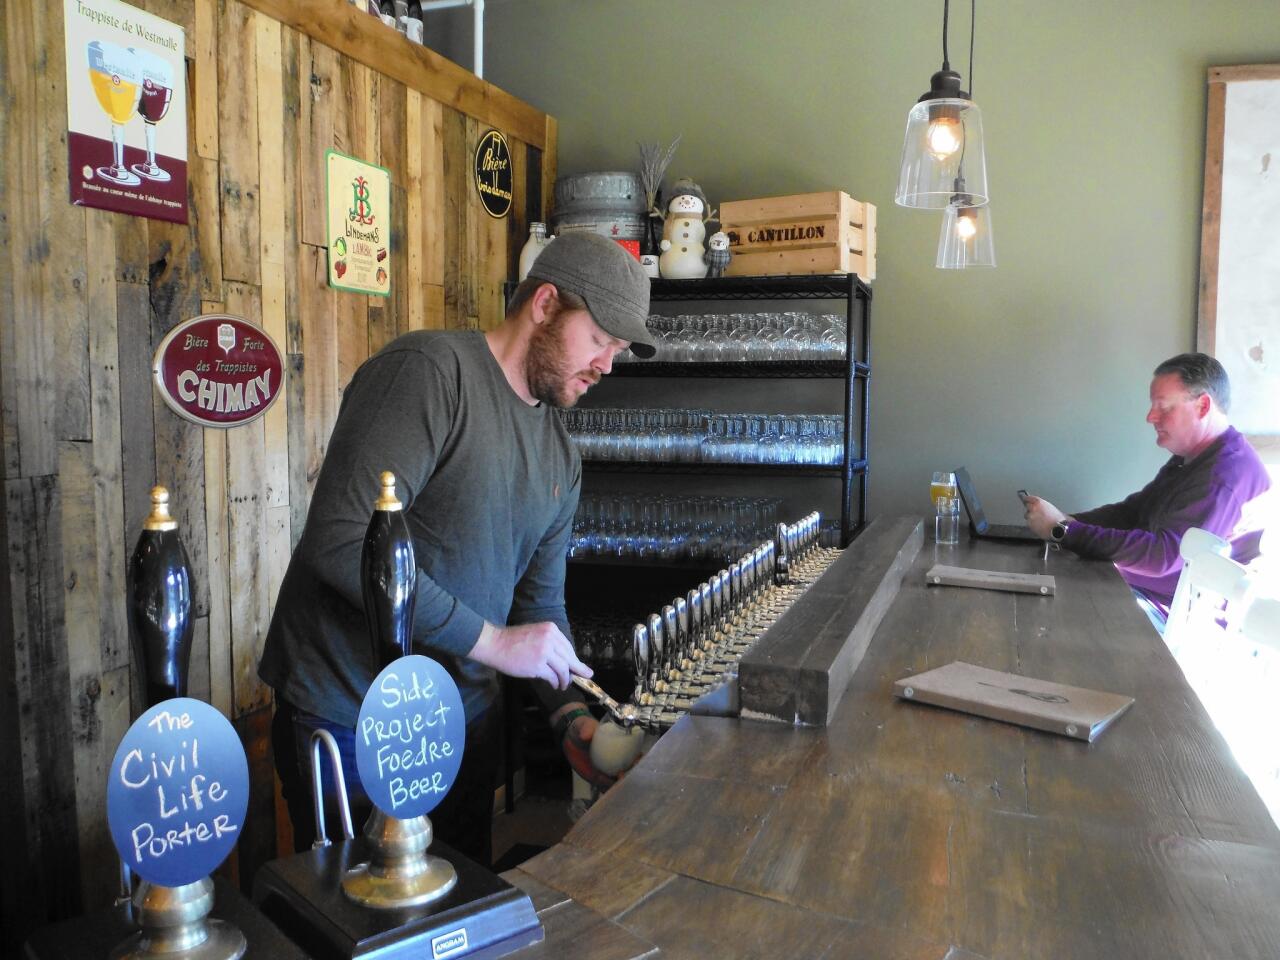 Cory King, owner of Side Project Brewing, pours a beer at his bar, The Side Project Cellar in Maplewood, Mo.